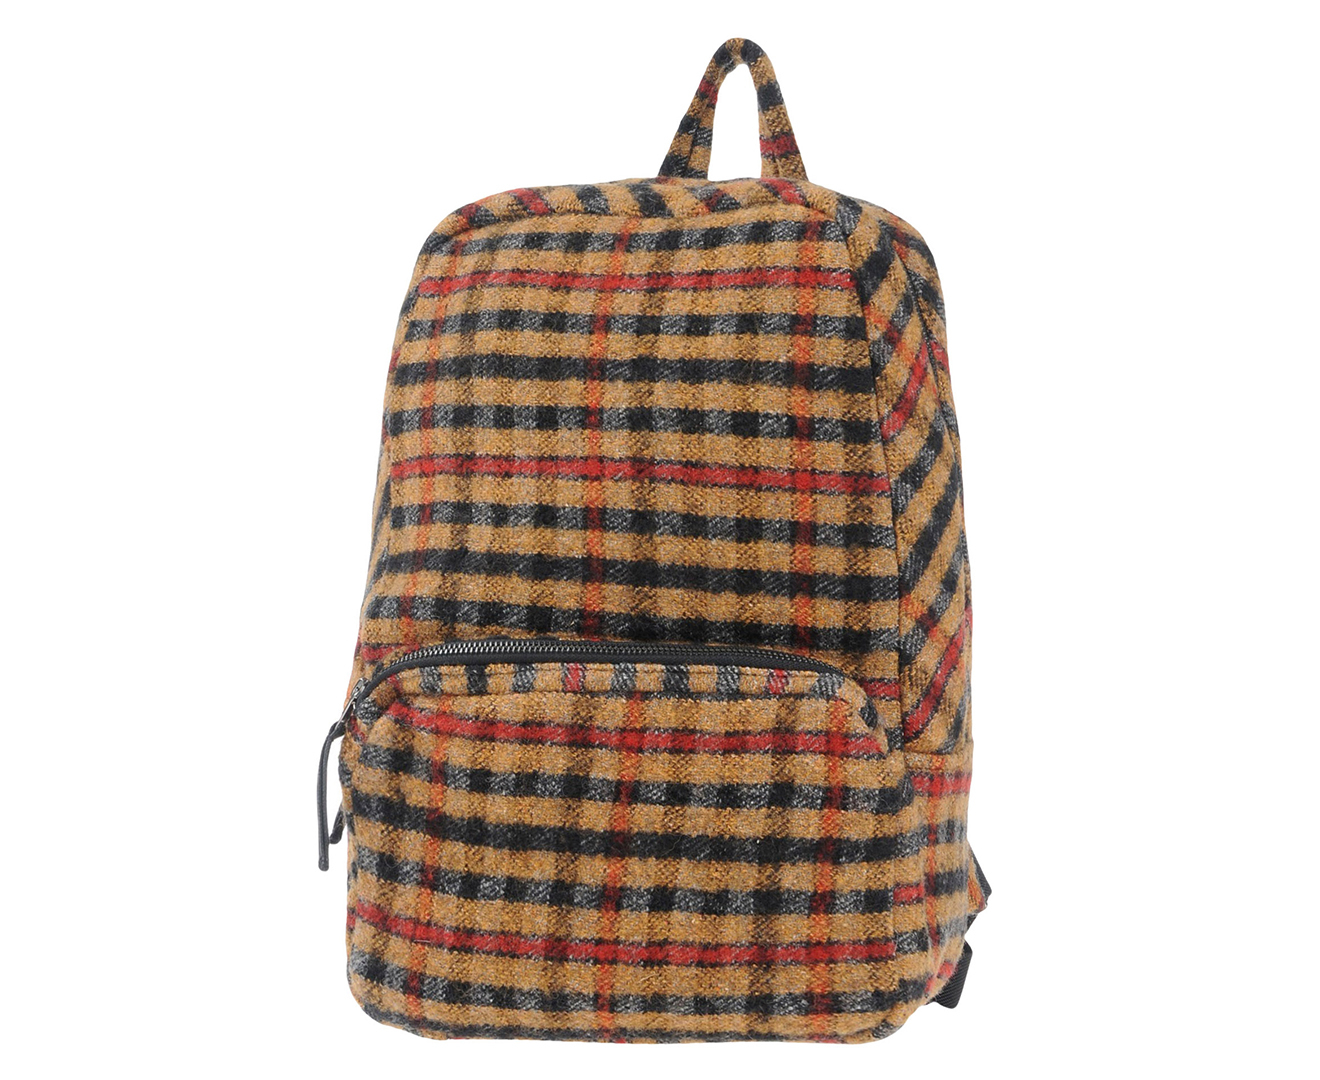 Tela Flannel Backpack - Camel | Catch.co.nz